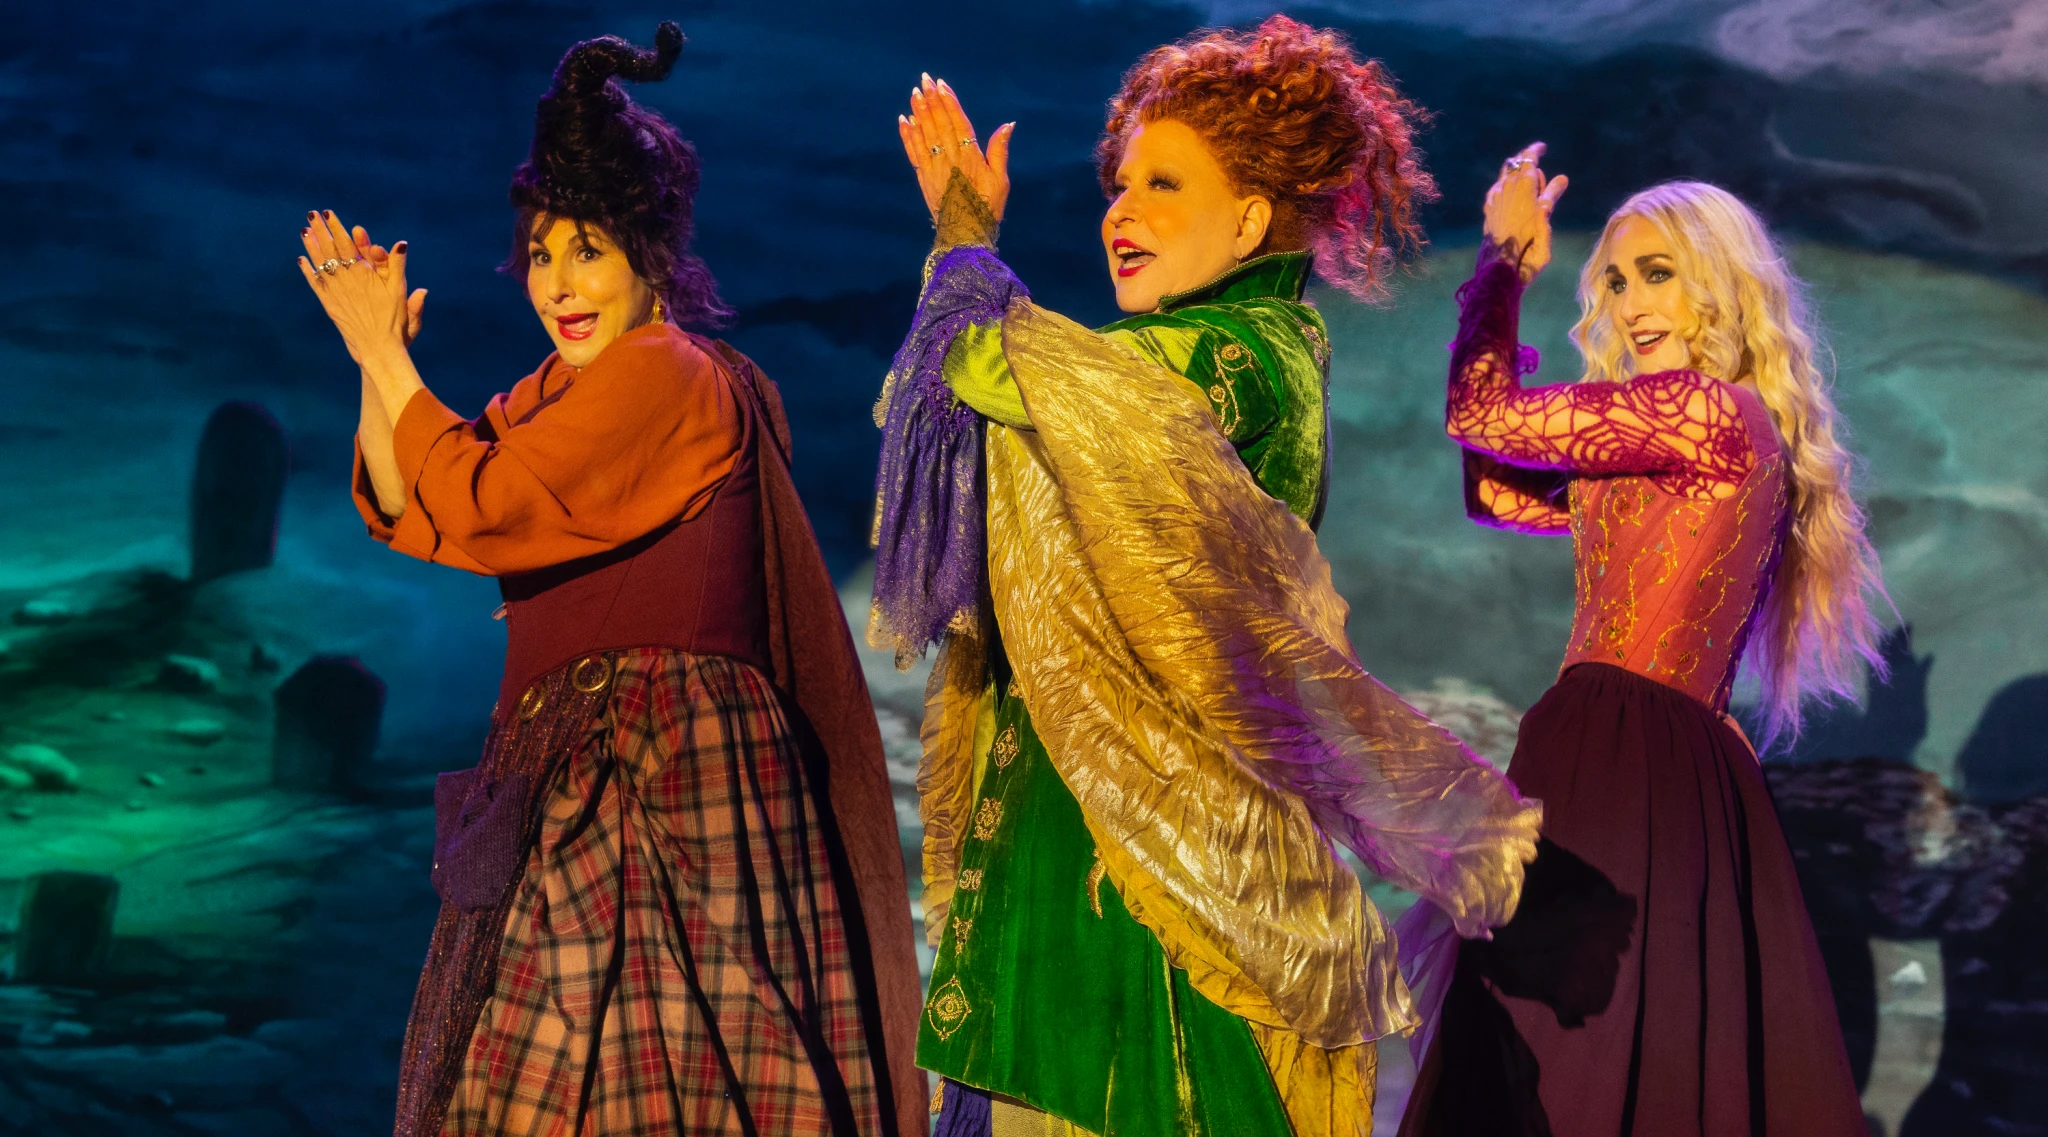 Bette Midler, Sarah Jessica Parker and Kathy Najimy Are Back Again in 'Hocus Pocus 2' Trailer